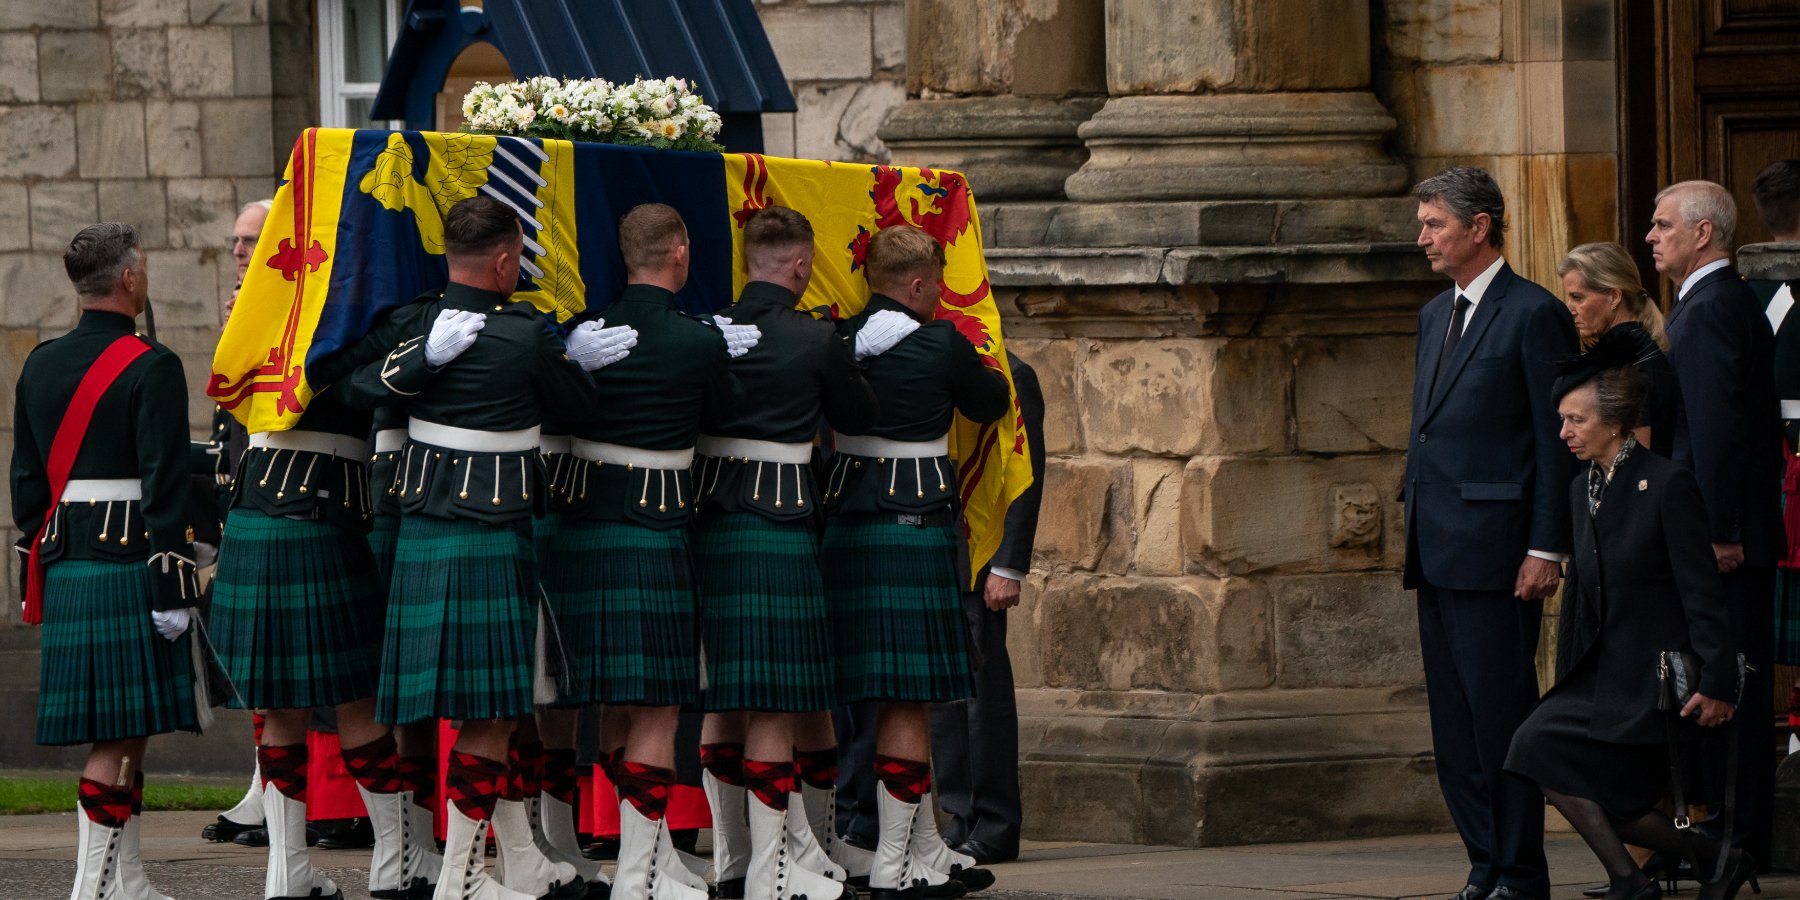 Queen Elizabeth's coffin watched over by Prince Andrew in Scotland in 2022.